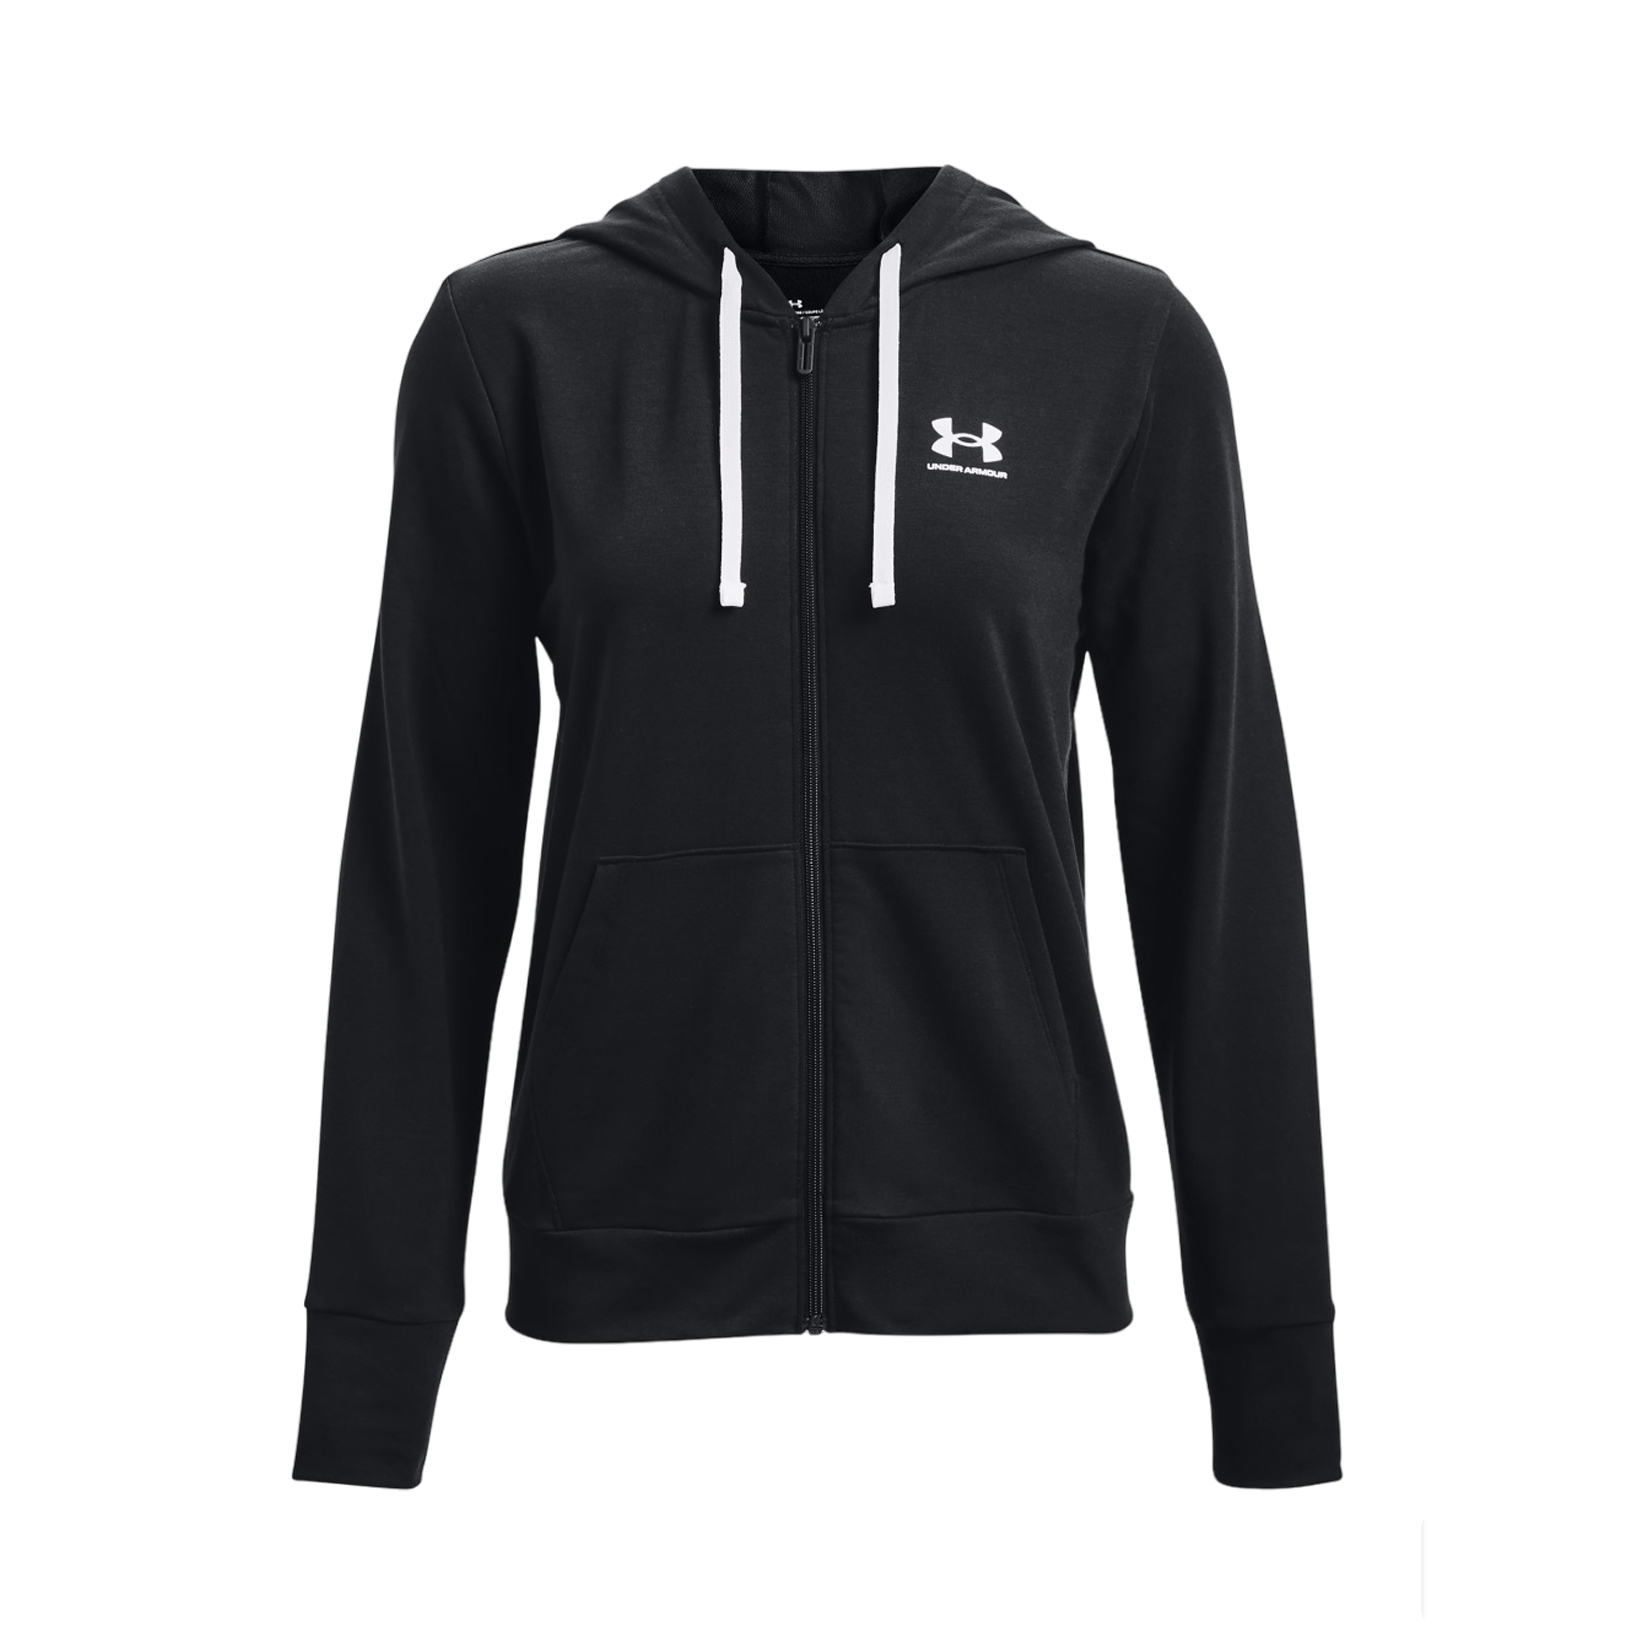 Under Armour Rival Terry Full Zip Hooded Γυναικεια Ζακετα Μαυρη